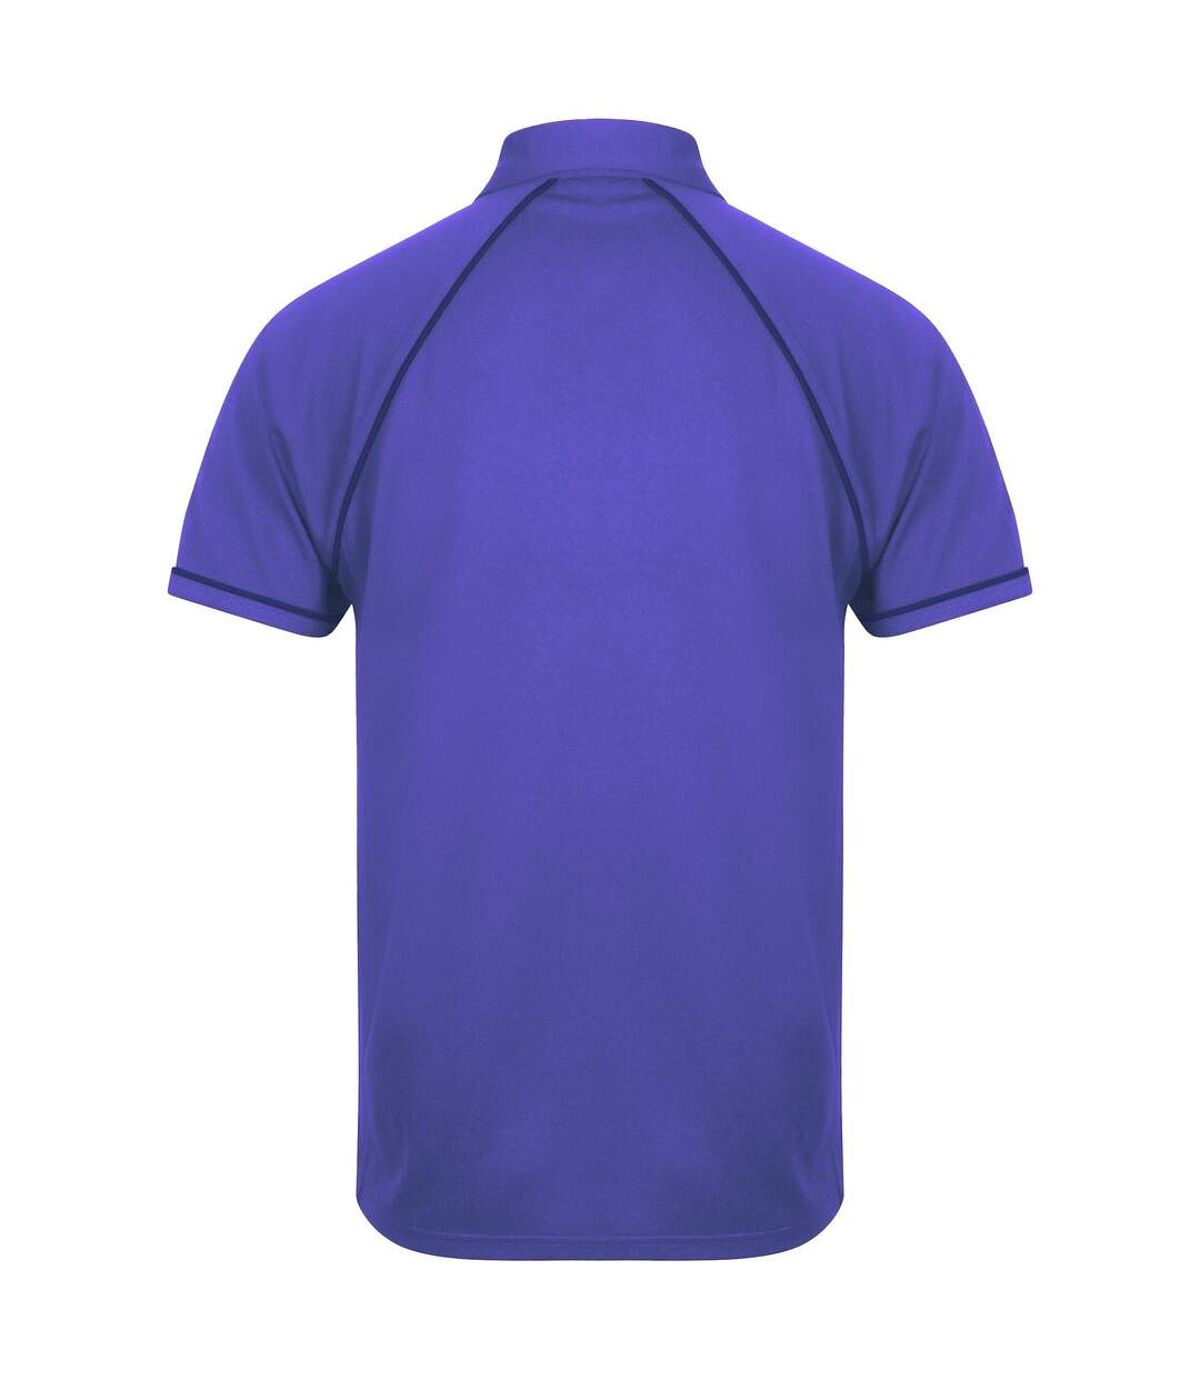 Finden & Hales Mens Piped Performance Sports Polo Shirt (Purple/Navy) - UTRW427